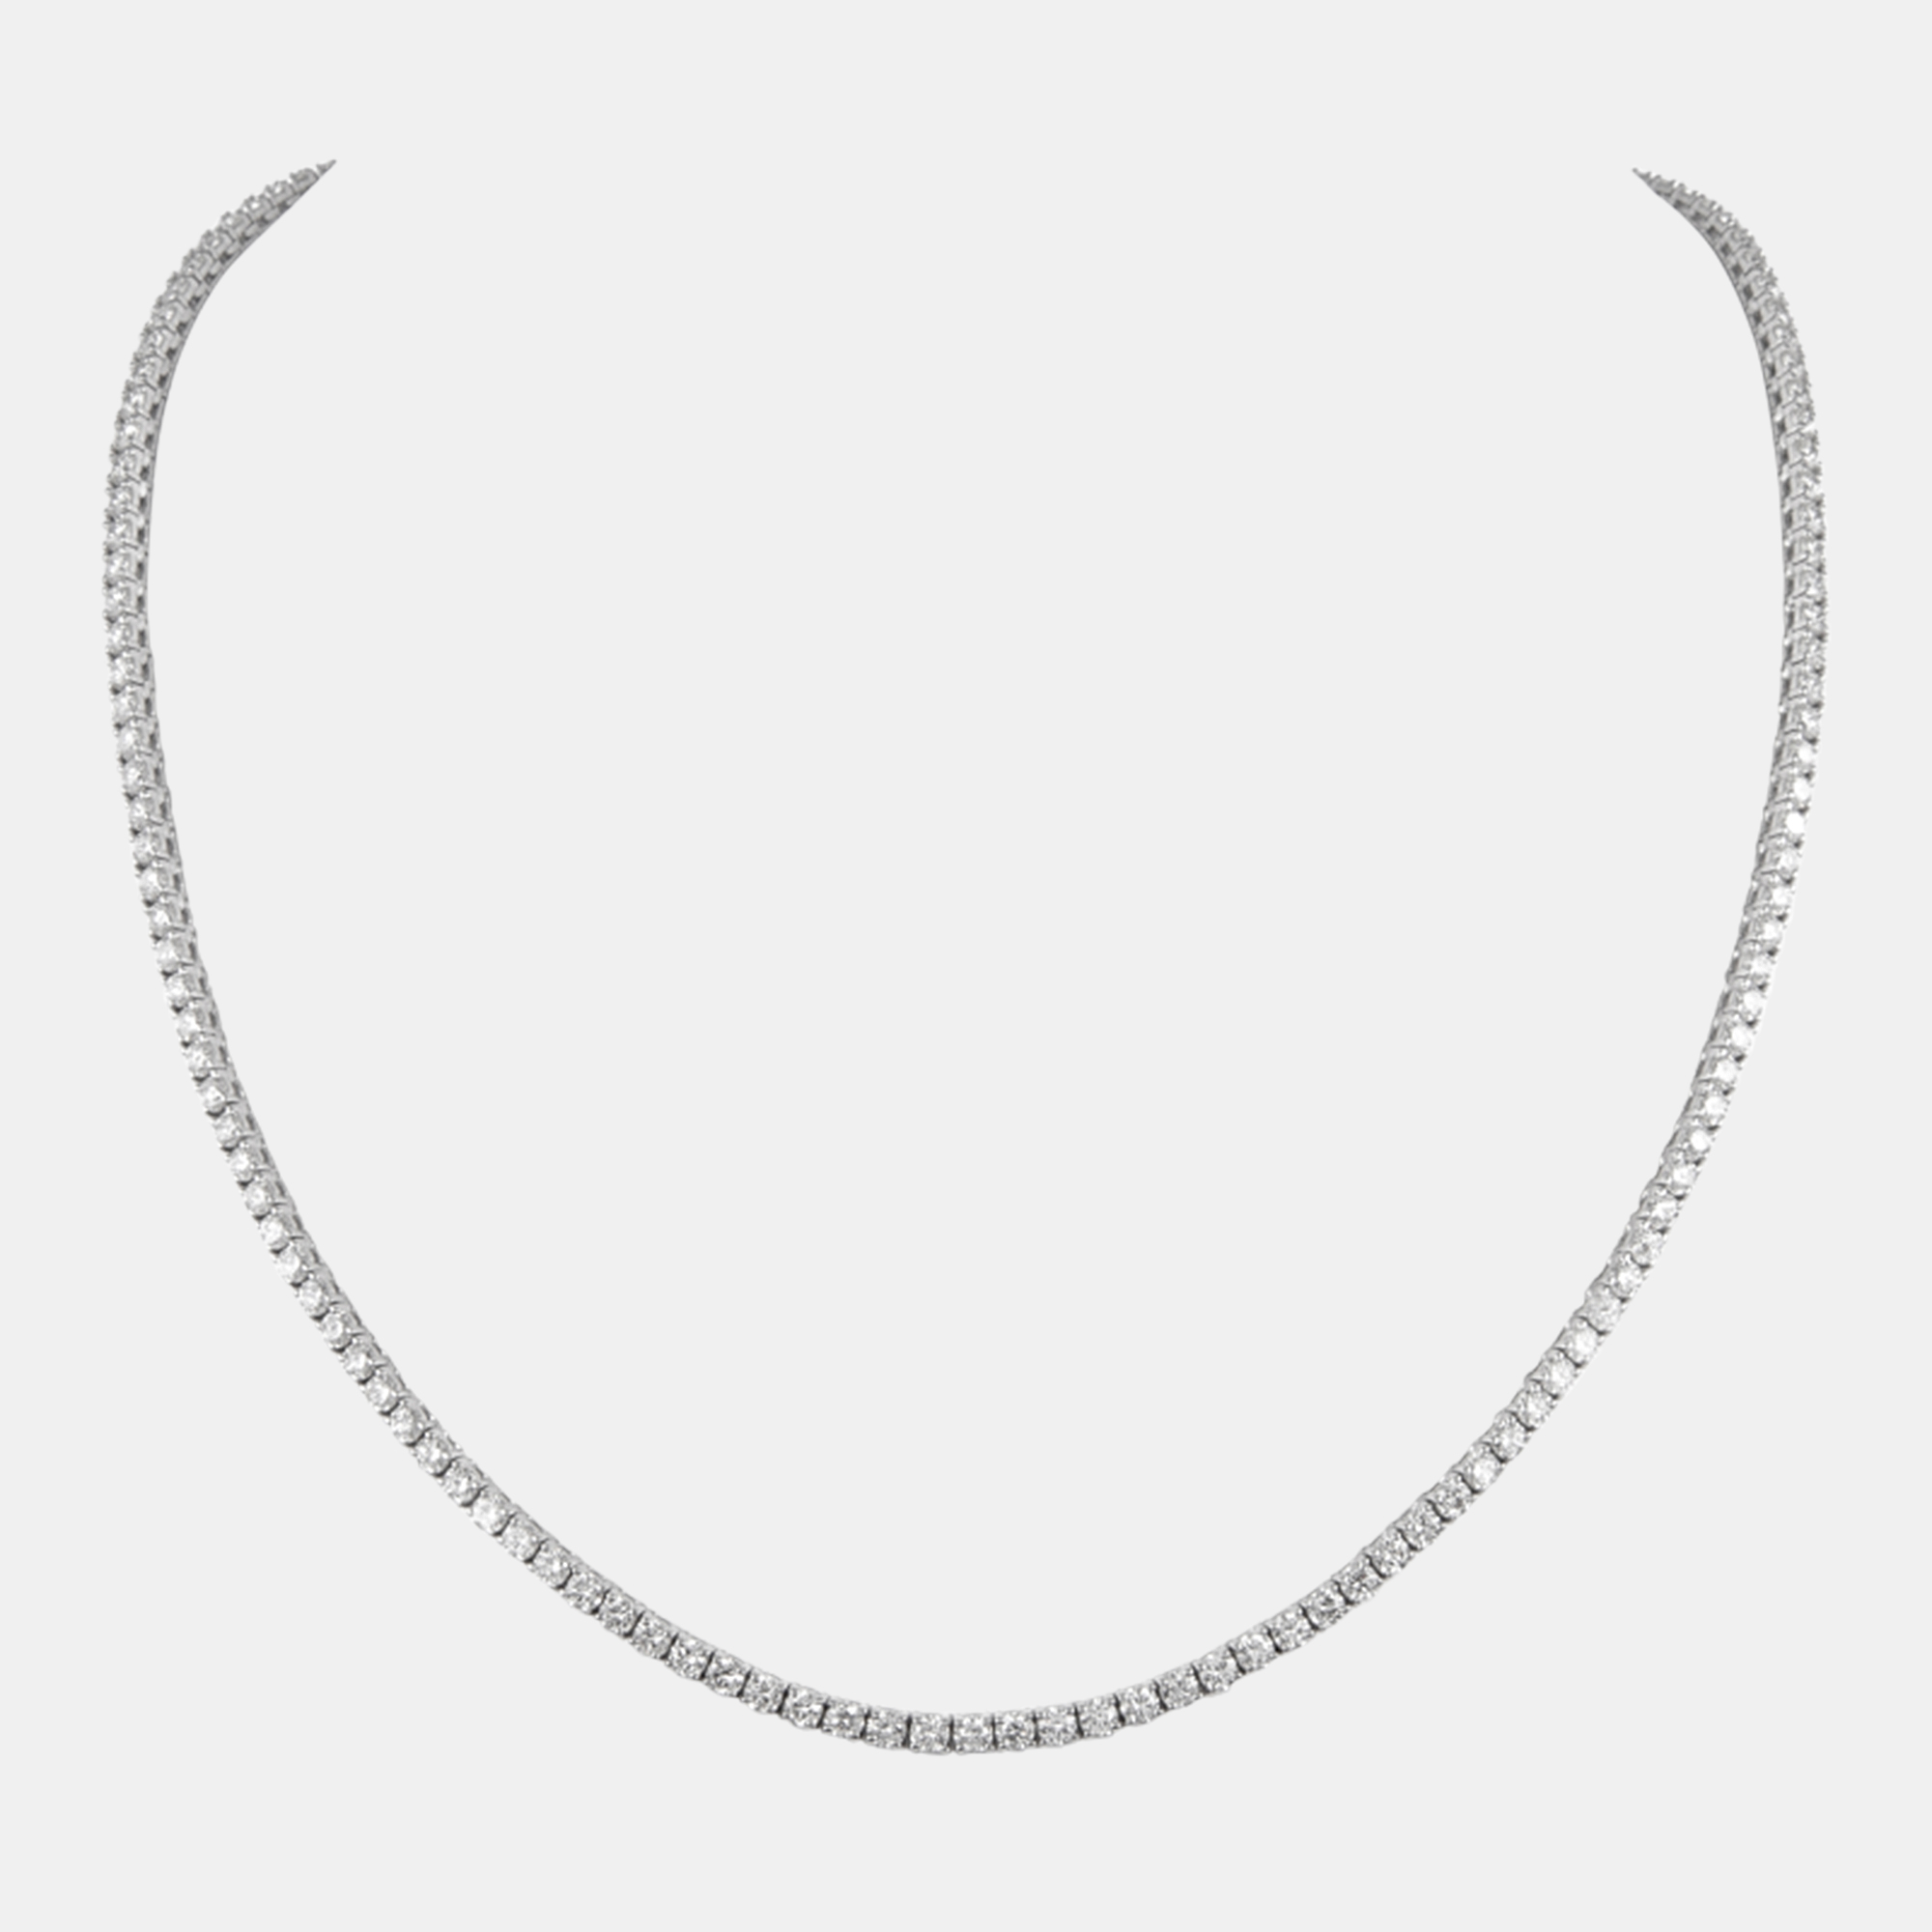 Pre-owned The Diamond Edit 18k White Gold Diamond 0.10 Ct. (each) Tennis Necklace